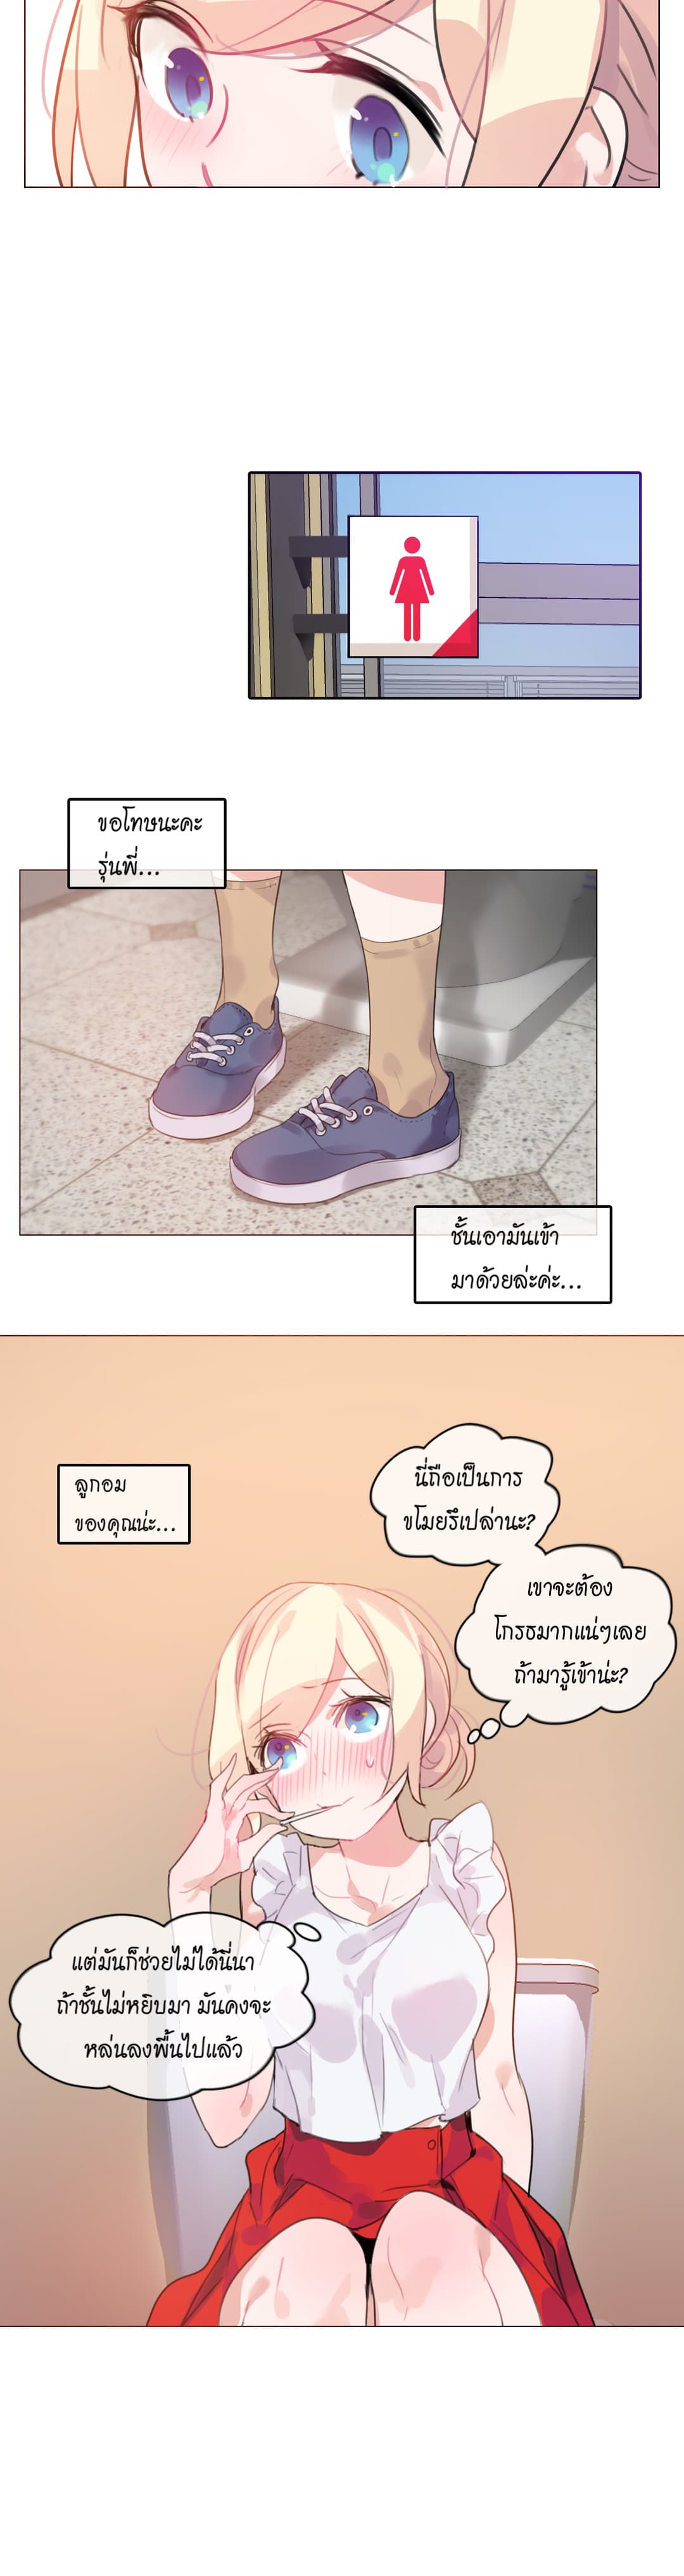 A Pervert’s Daily Life 16 (12)